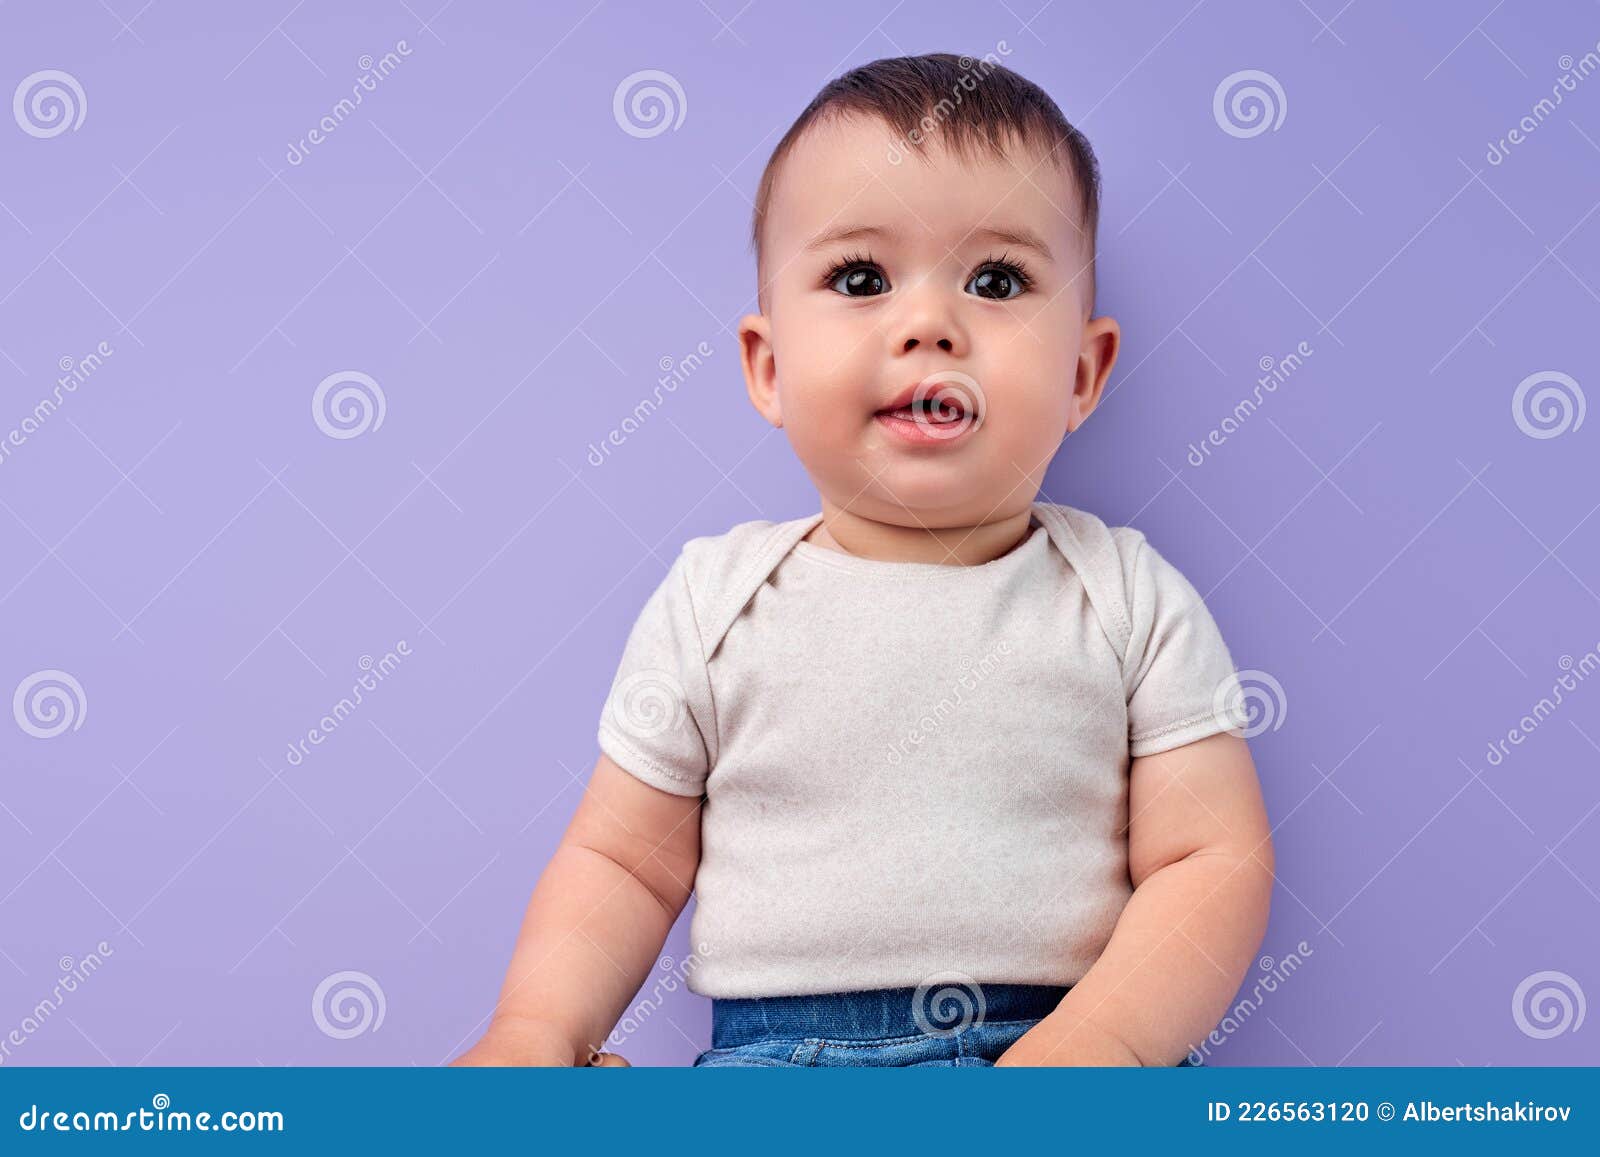 Cute Baby Child with Sweet Cute Facial Expression Looking Up ...